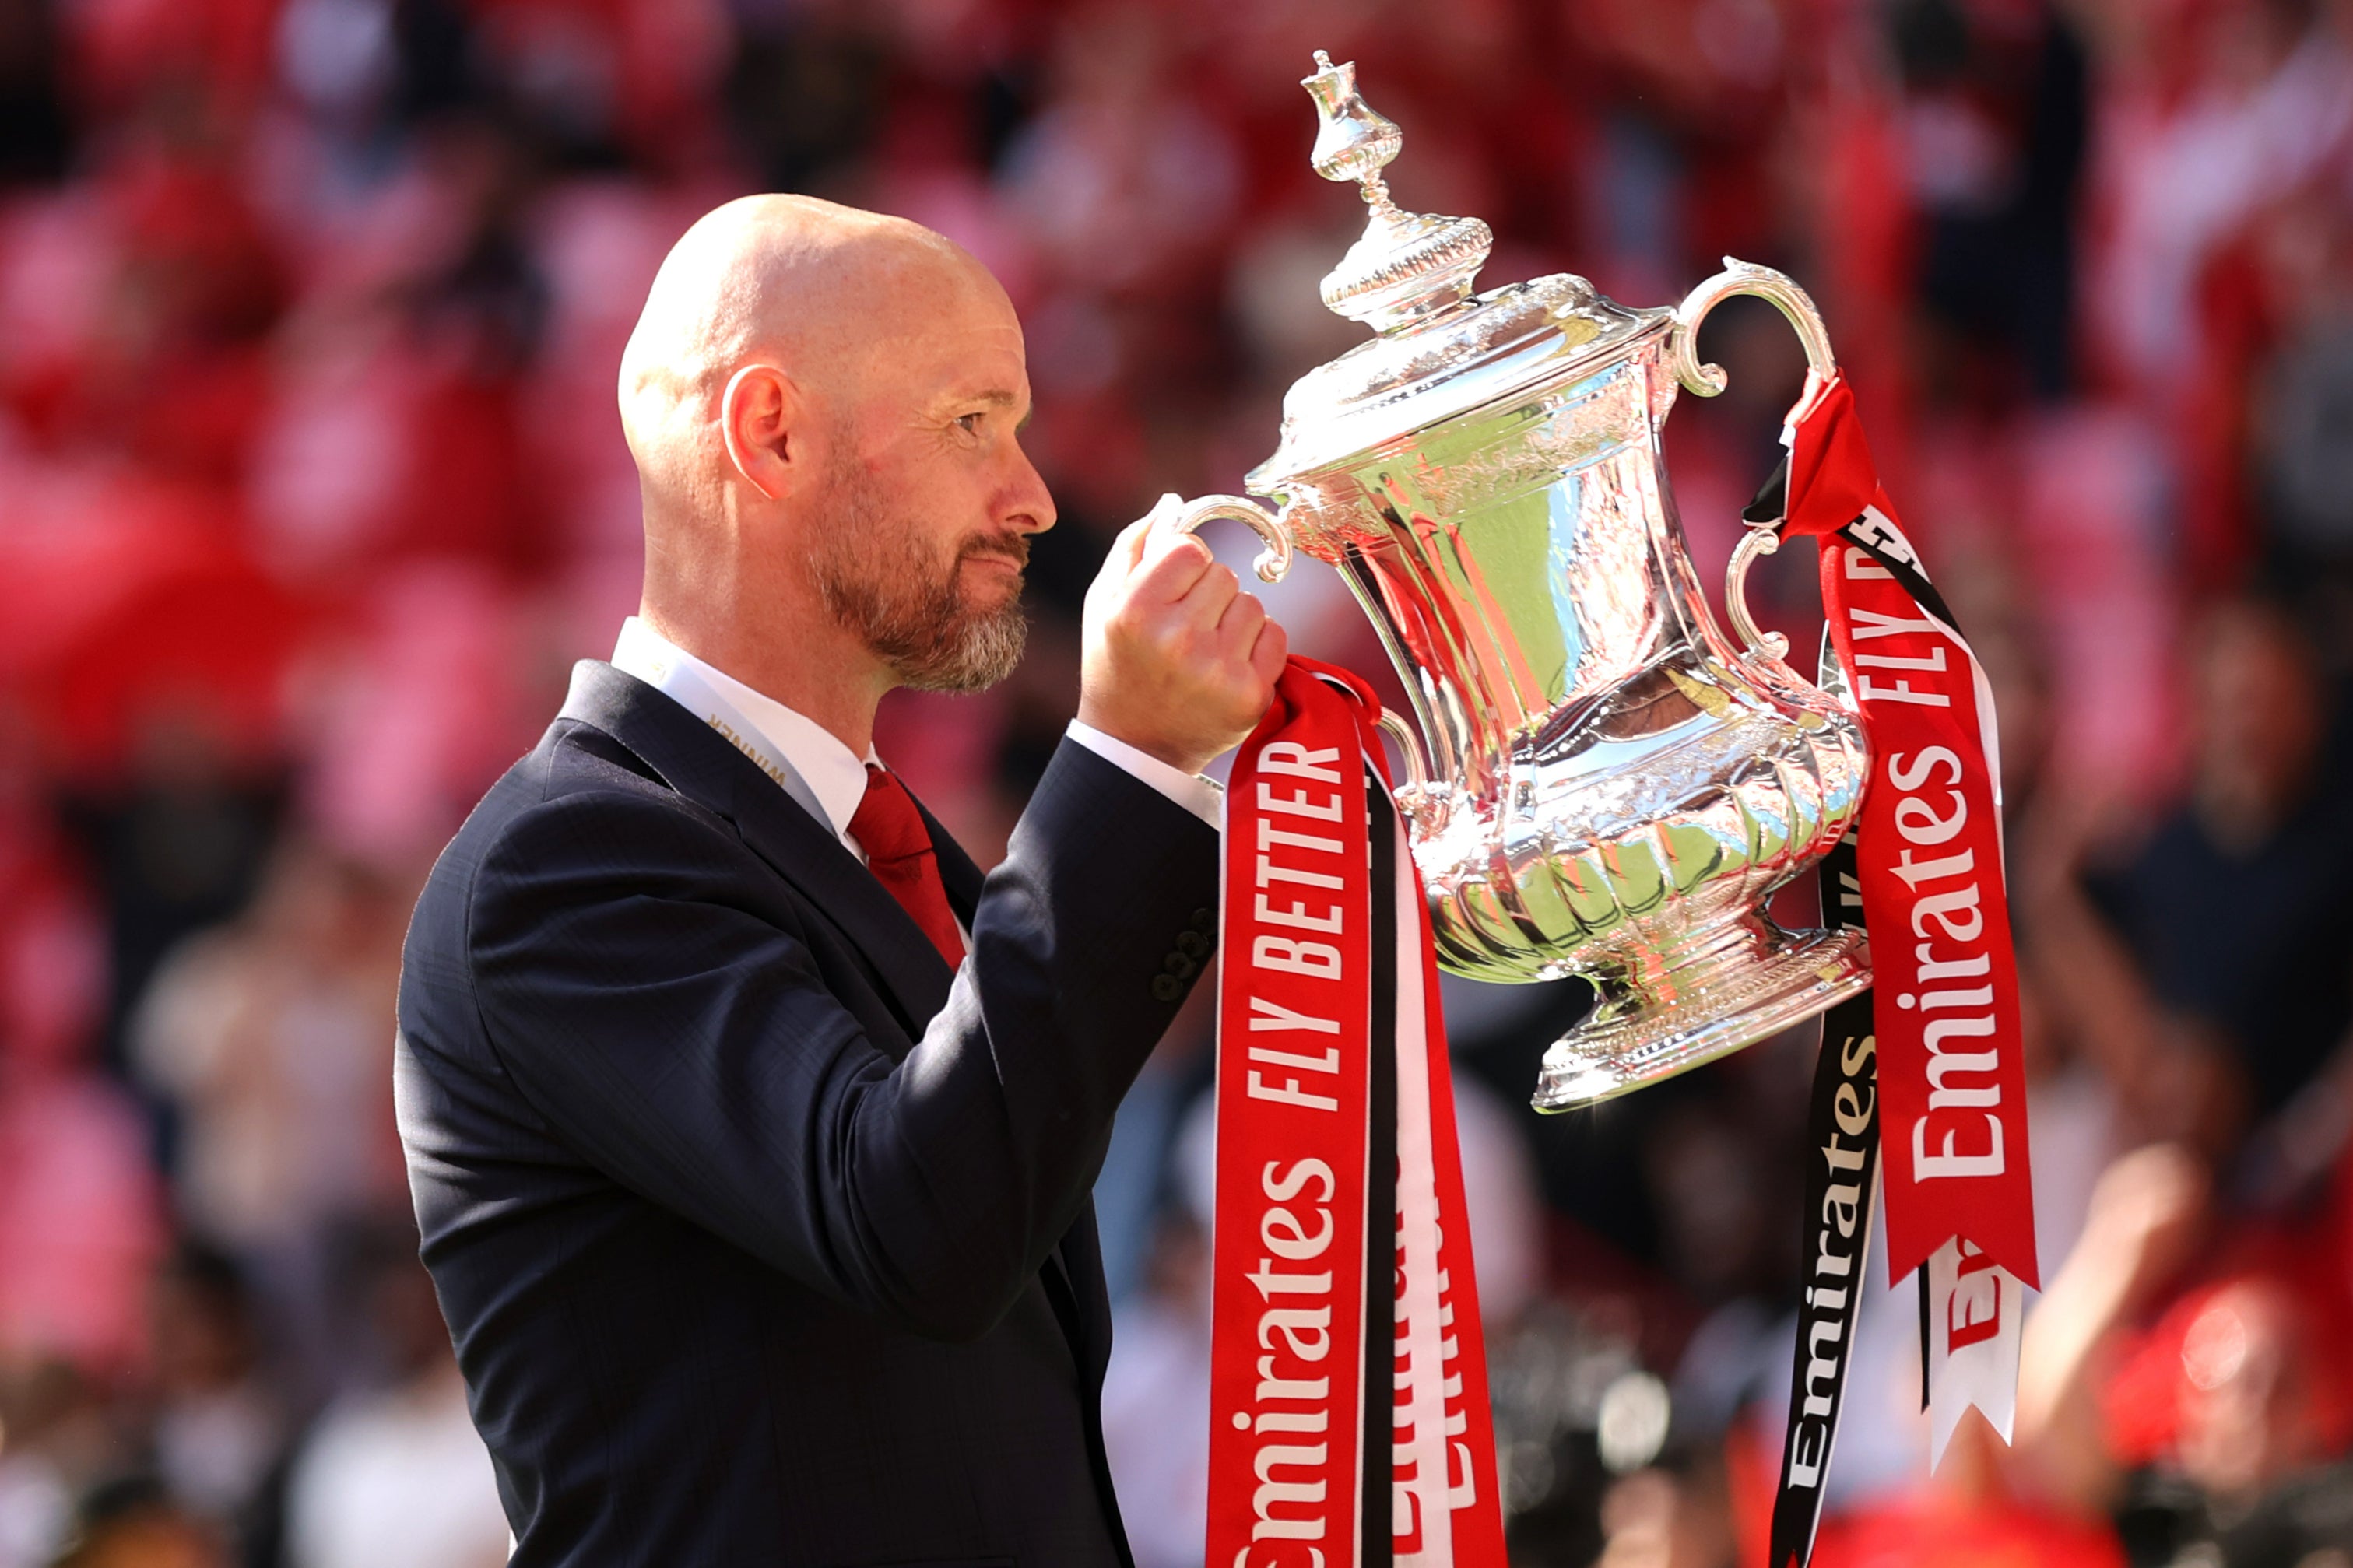 Erik ten Hag led Man United to an unlikely FA Cup win